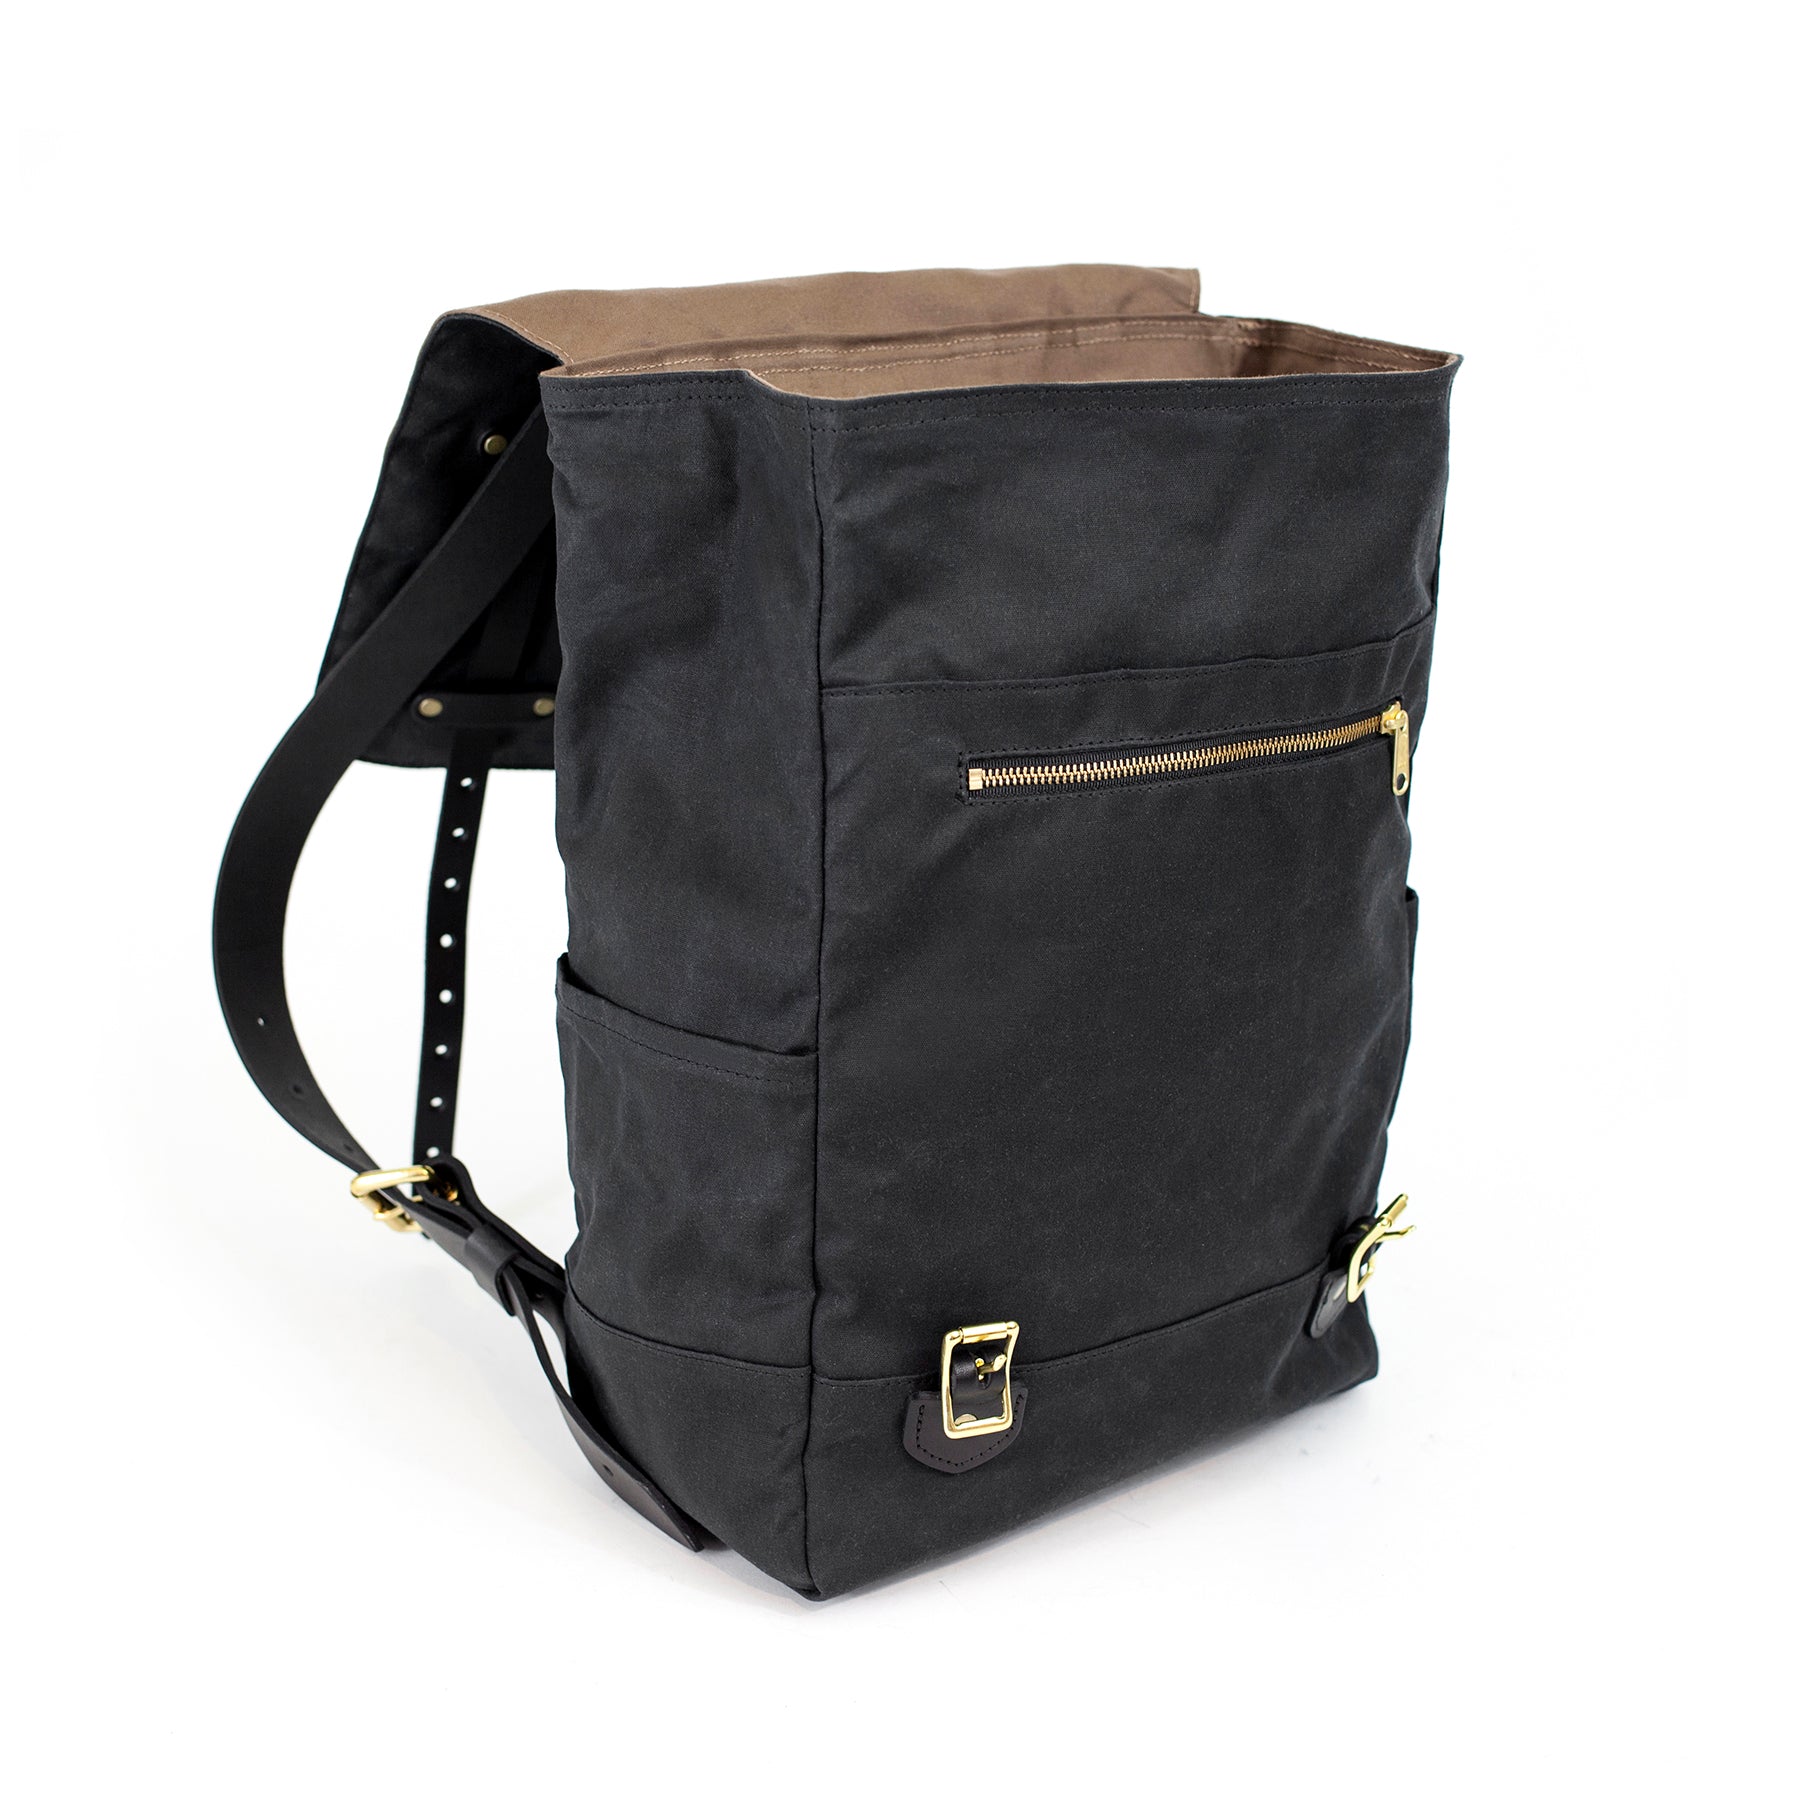 Black leather backpack with waxed canvas roll to close top and leather  front pocket